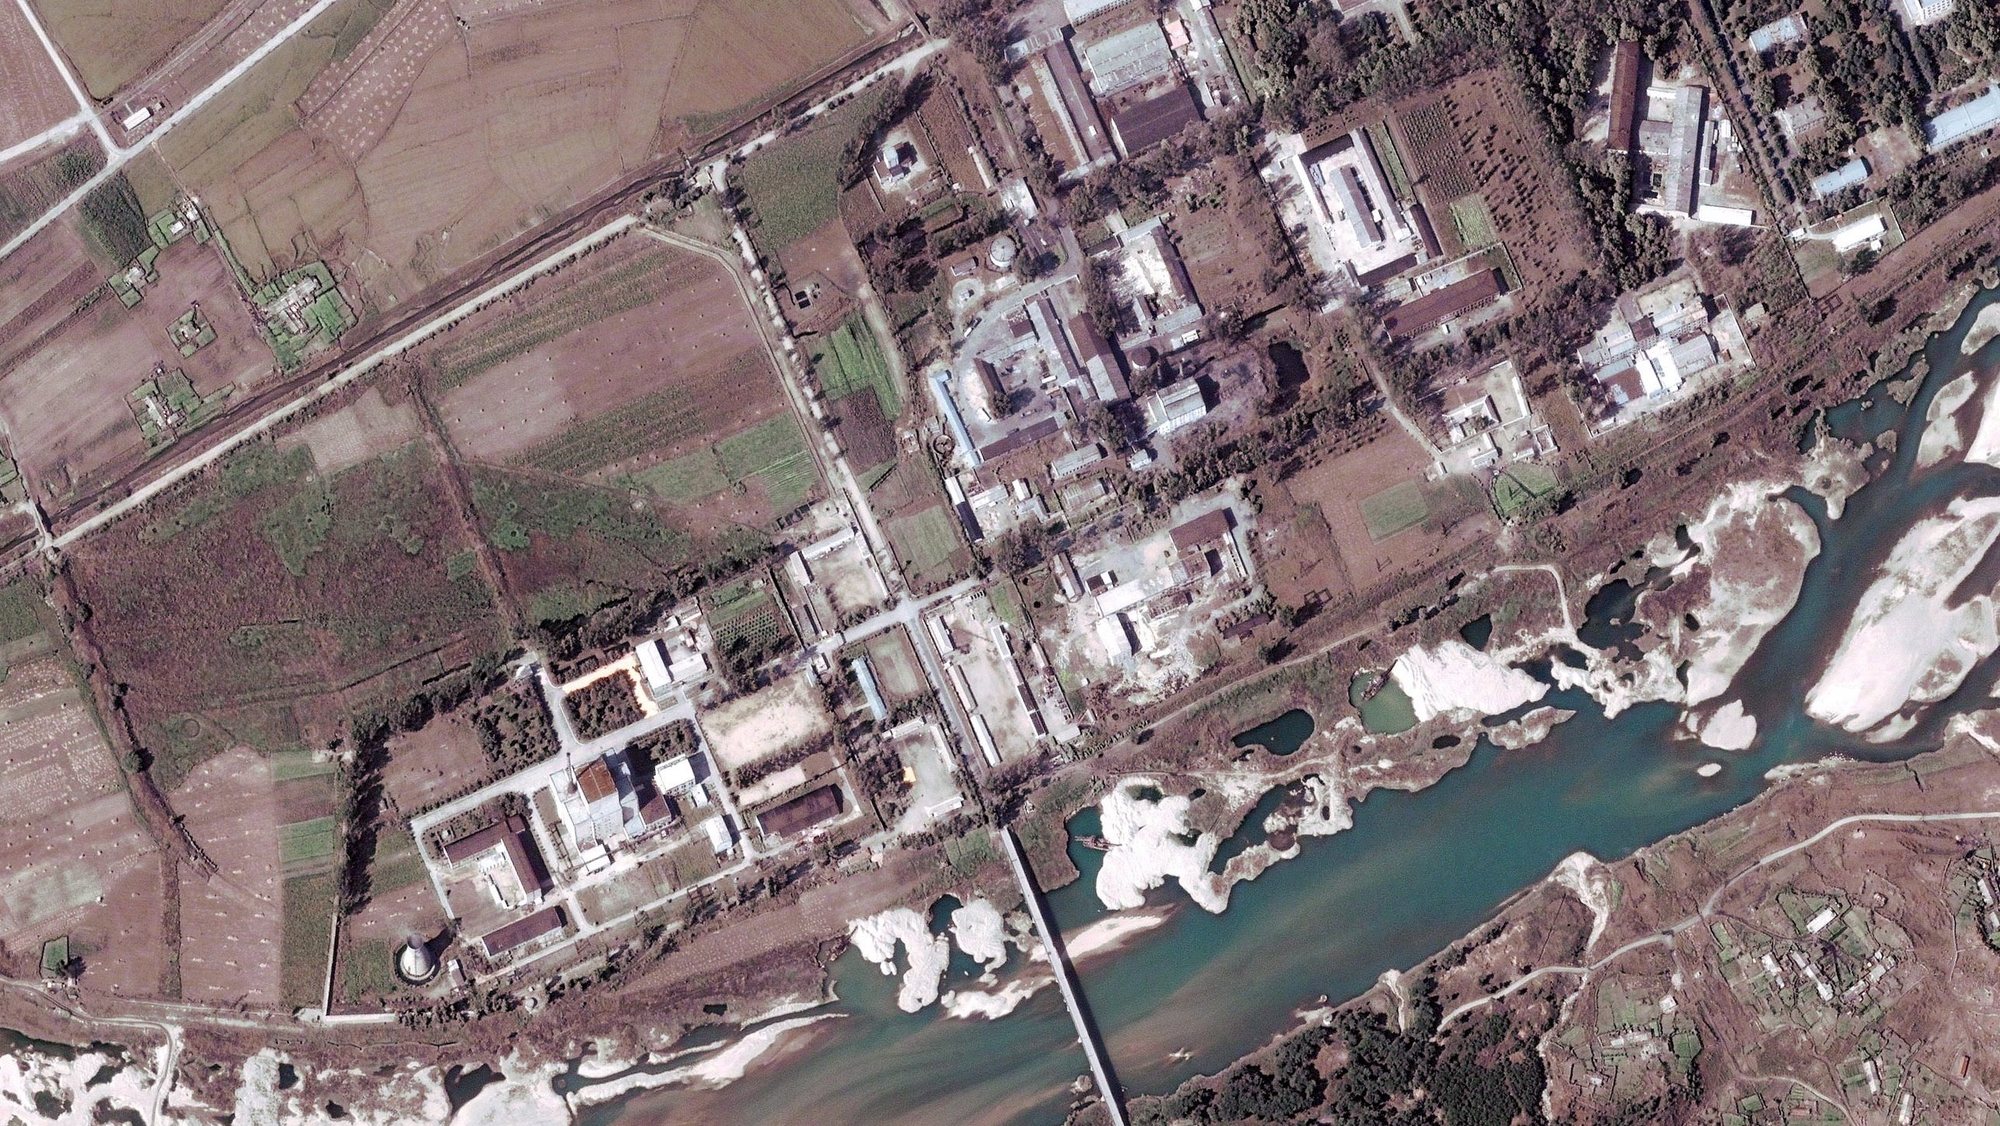 epa03647418 (FILE) A file handout satelite image provided by DigitalGlobe and dated 29 September 2004 shows the Yongbyon complex nuclear facility, some 100 km north of Pyongyang, North Korea. According to media reports on 02 April 2013, North Korea has announced that it will reopen the Yongbyon nuclear complex which was closed in 2007.  EPA/DIGITAL GLOBE / HANDOUT MANDATORY CREDIT HANDOUT EDITORIAL USE ONLY/NO SALES